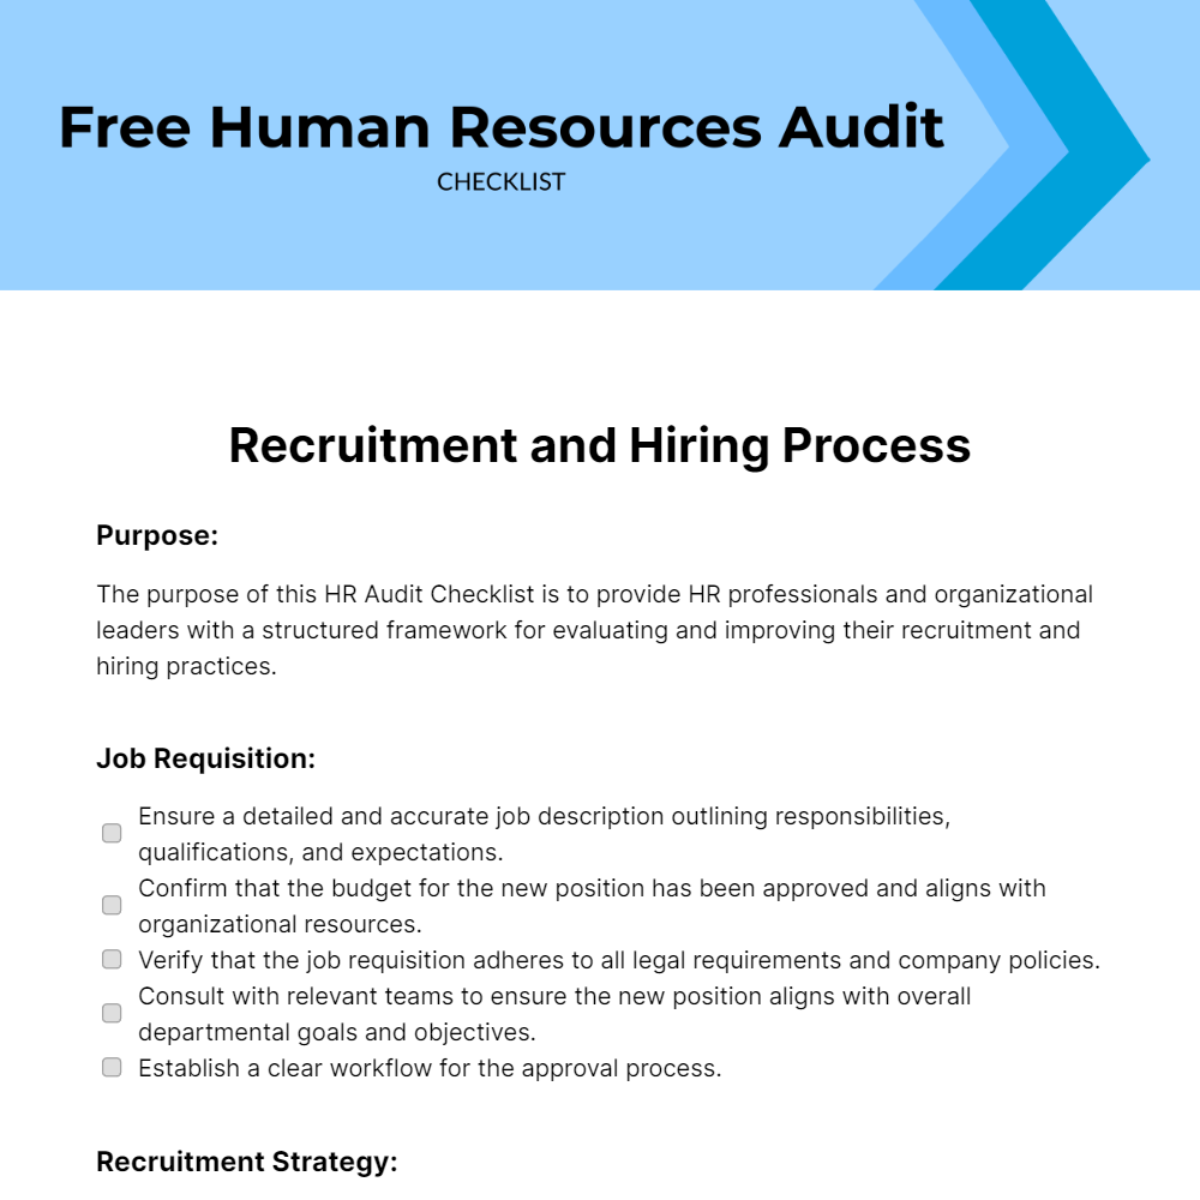 Free Human Resources Audit Checklist Template